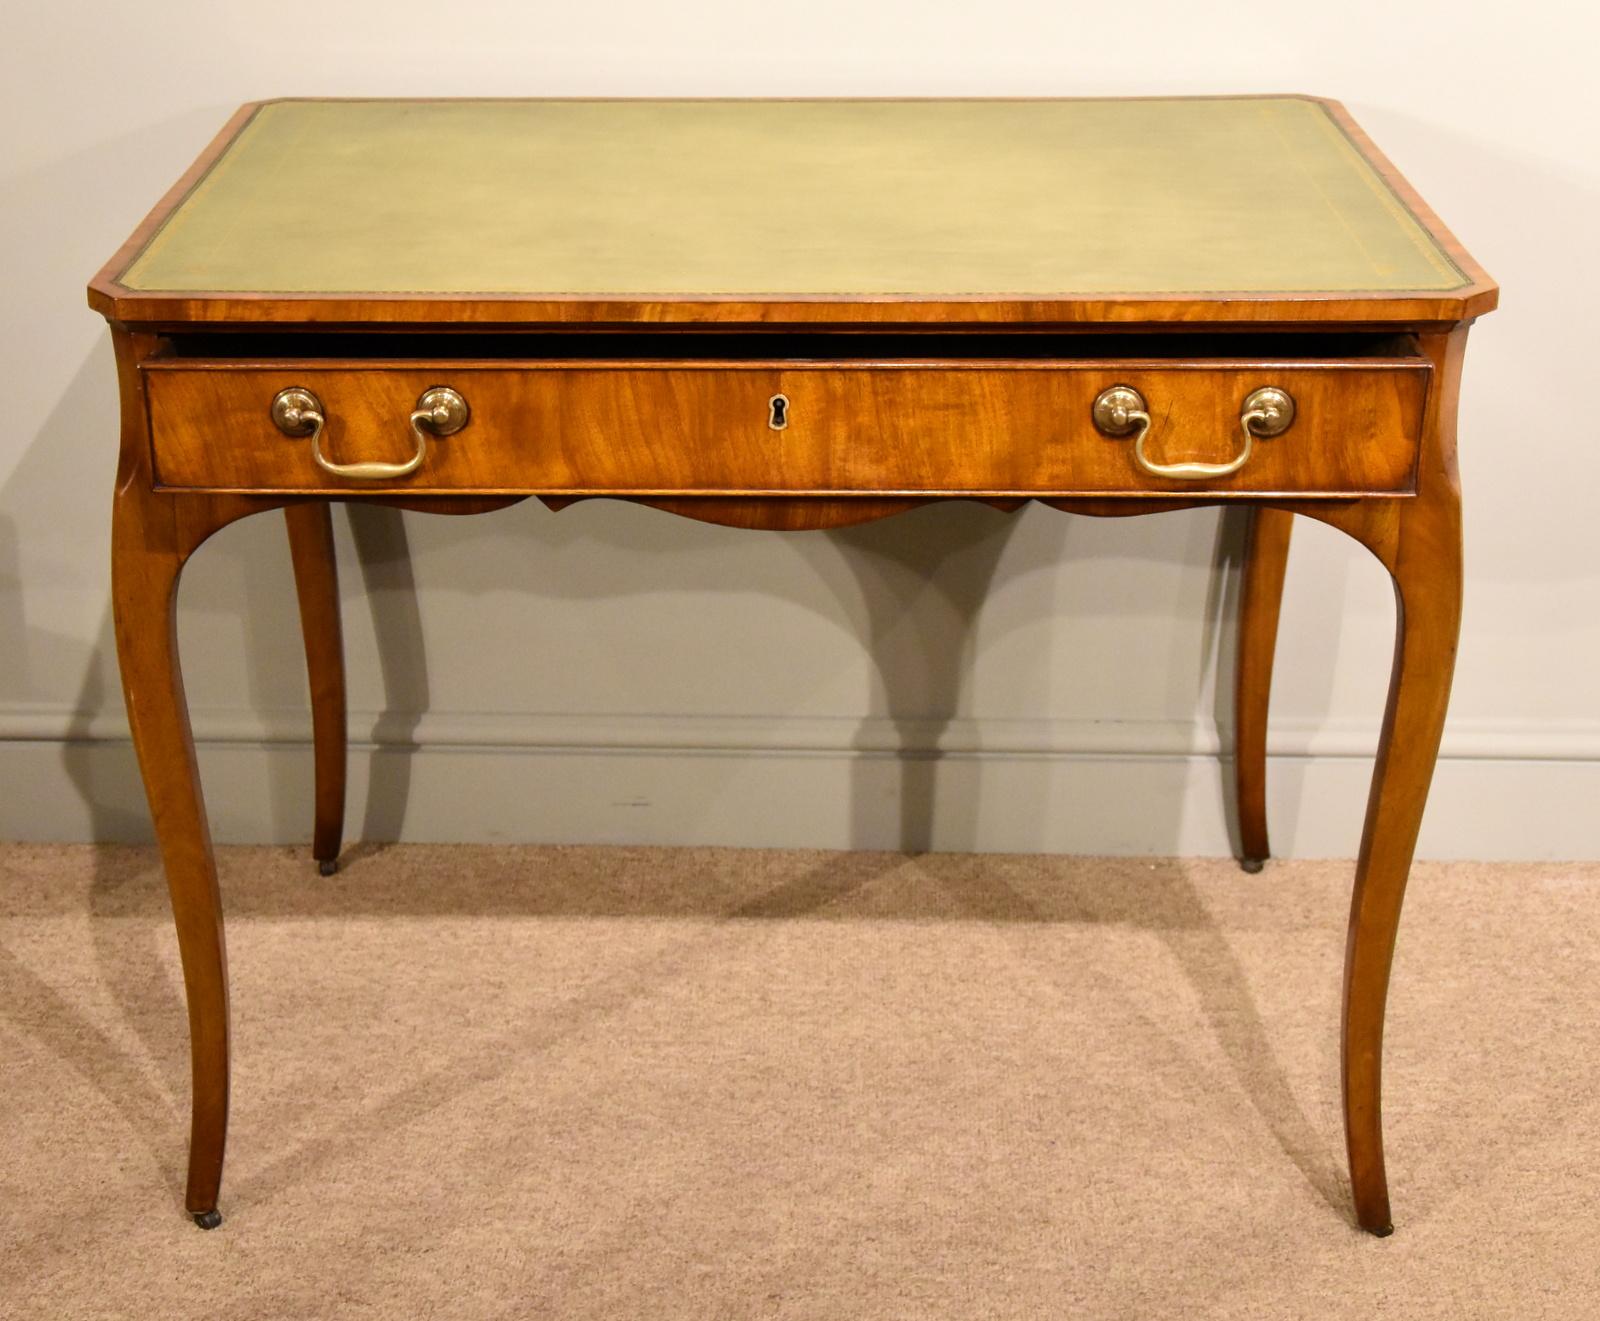 A good 18th century Hepplewhite period writing table with a single drawer green leather original castors

Measures: height 29.5